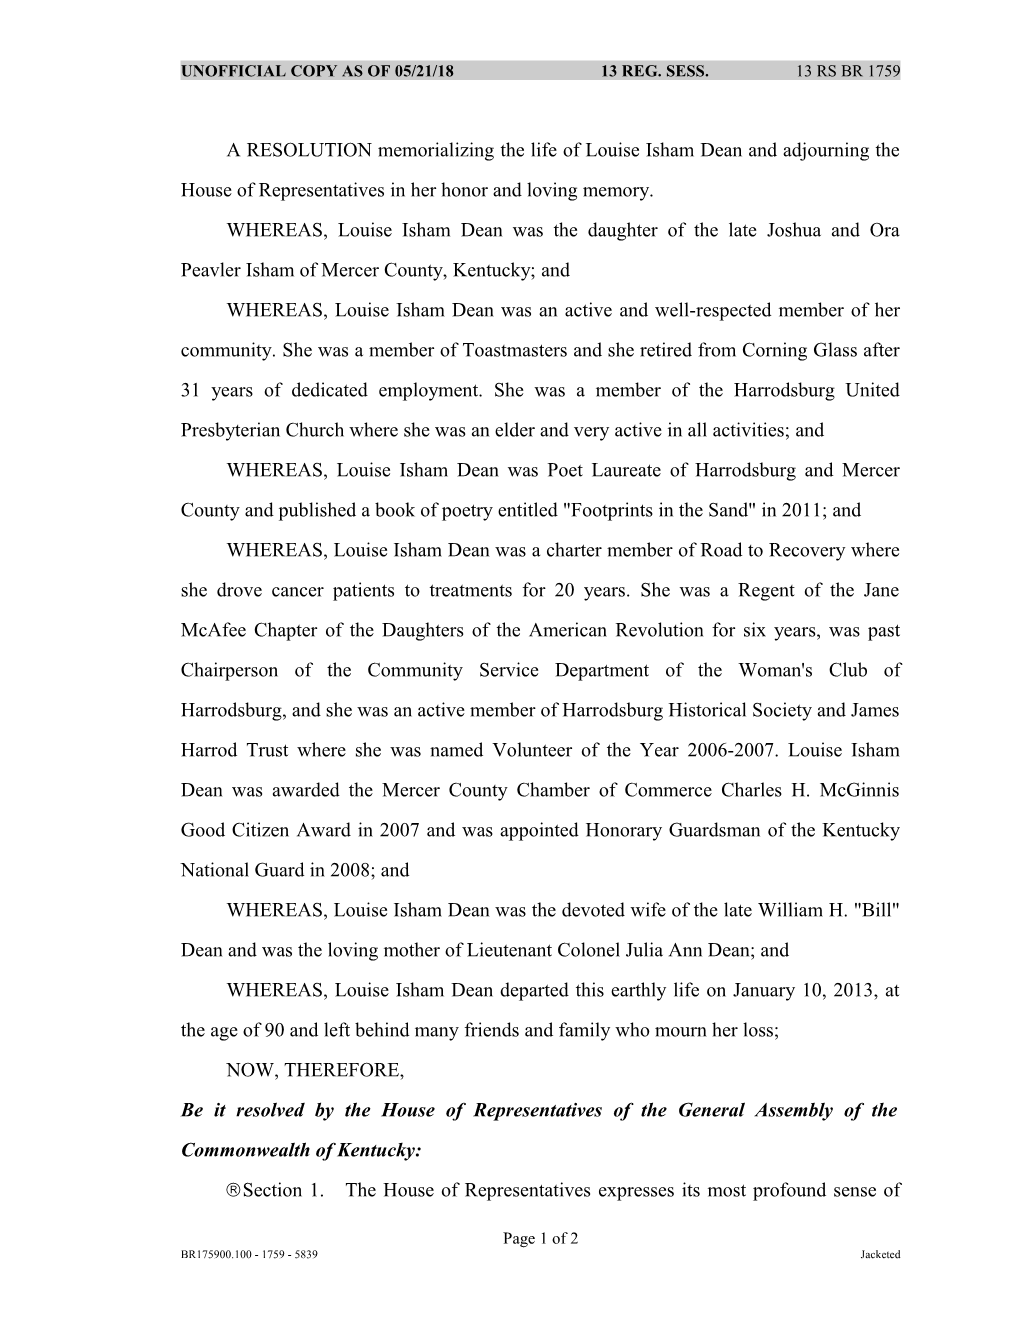 A RESOLUTION Memorializing the Life of Louise Isham Dean and Adjourning the House Of